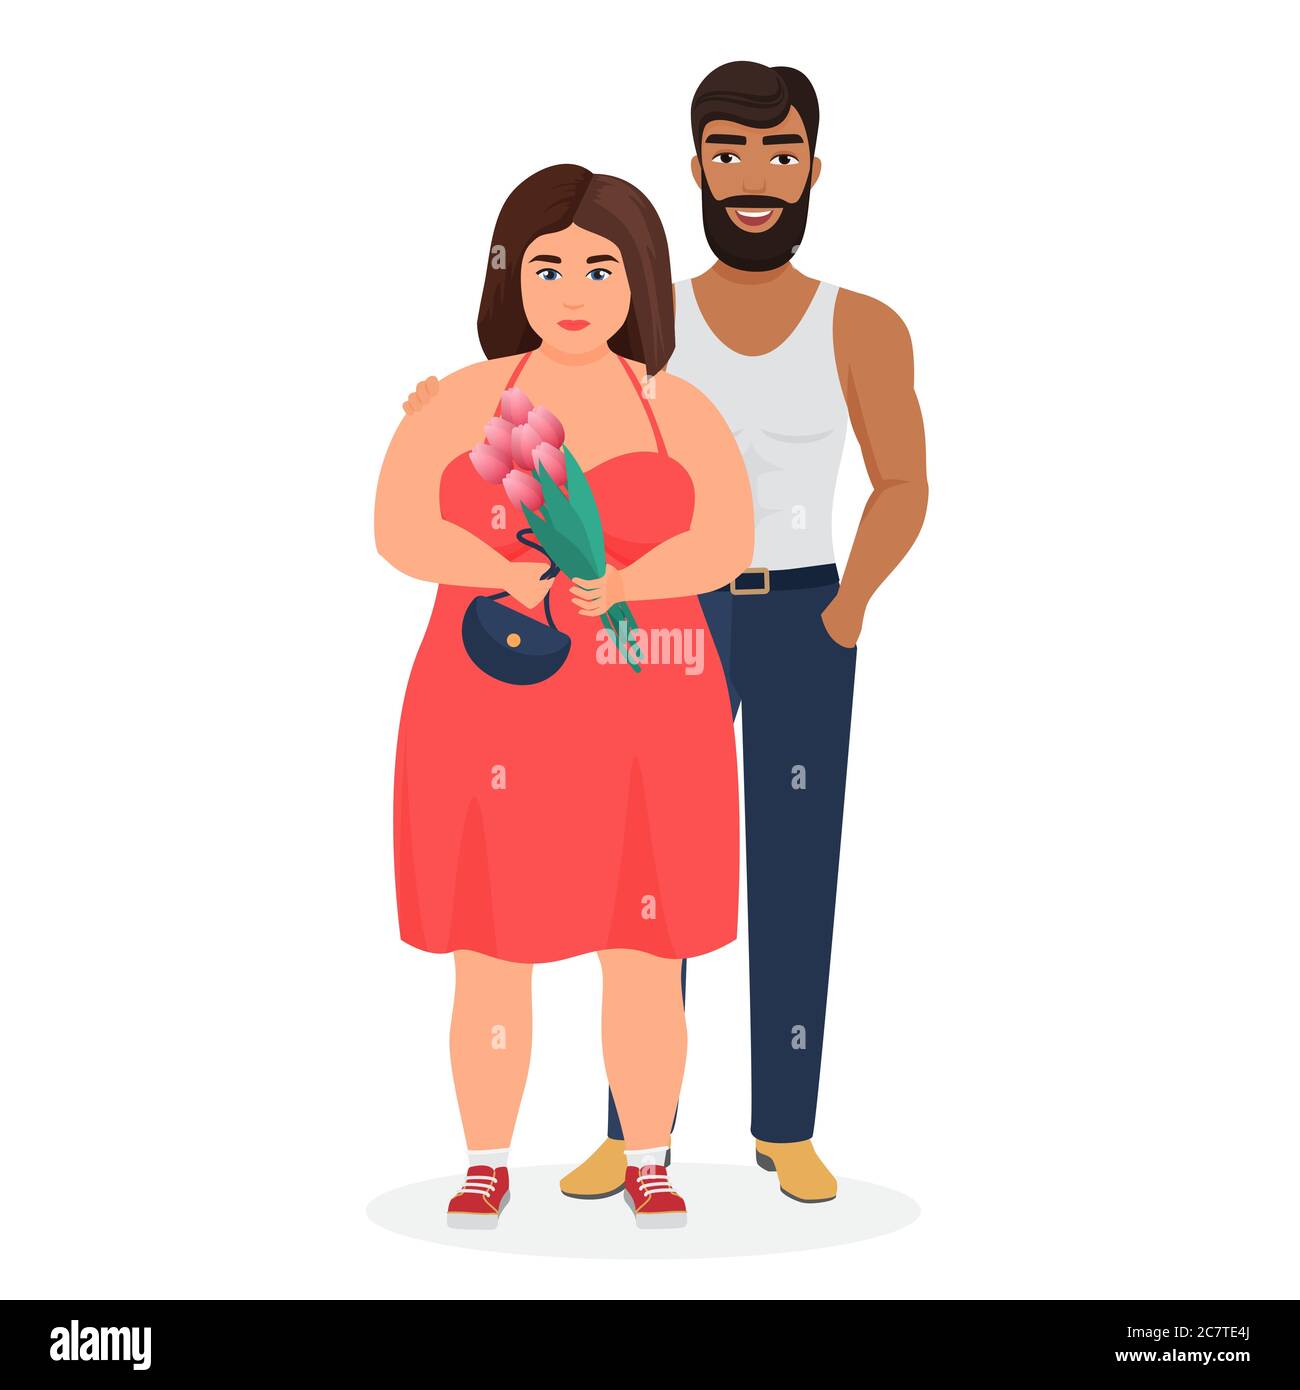 Strong dark skin man and curvy fat caucasian woman couple characters flat vector illustration. Lovely family portrait, unequal marriage, love against stereotypes, strange couple. Stock Vector